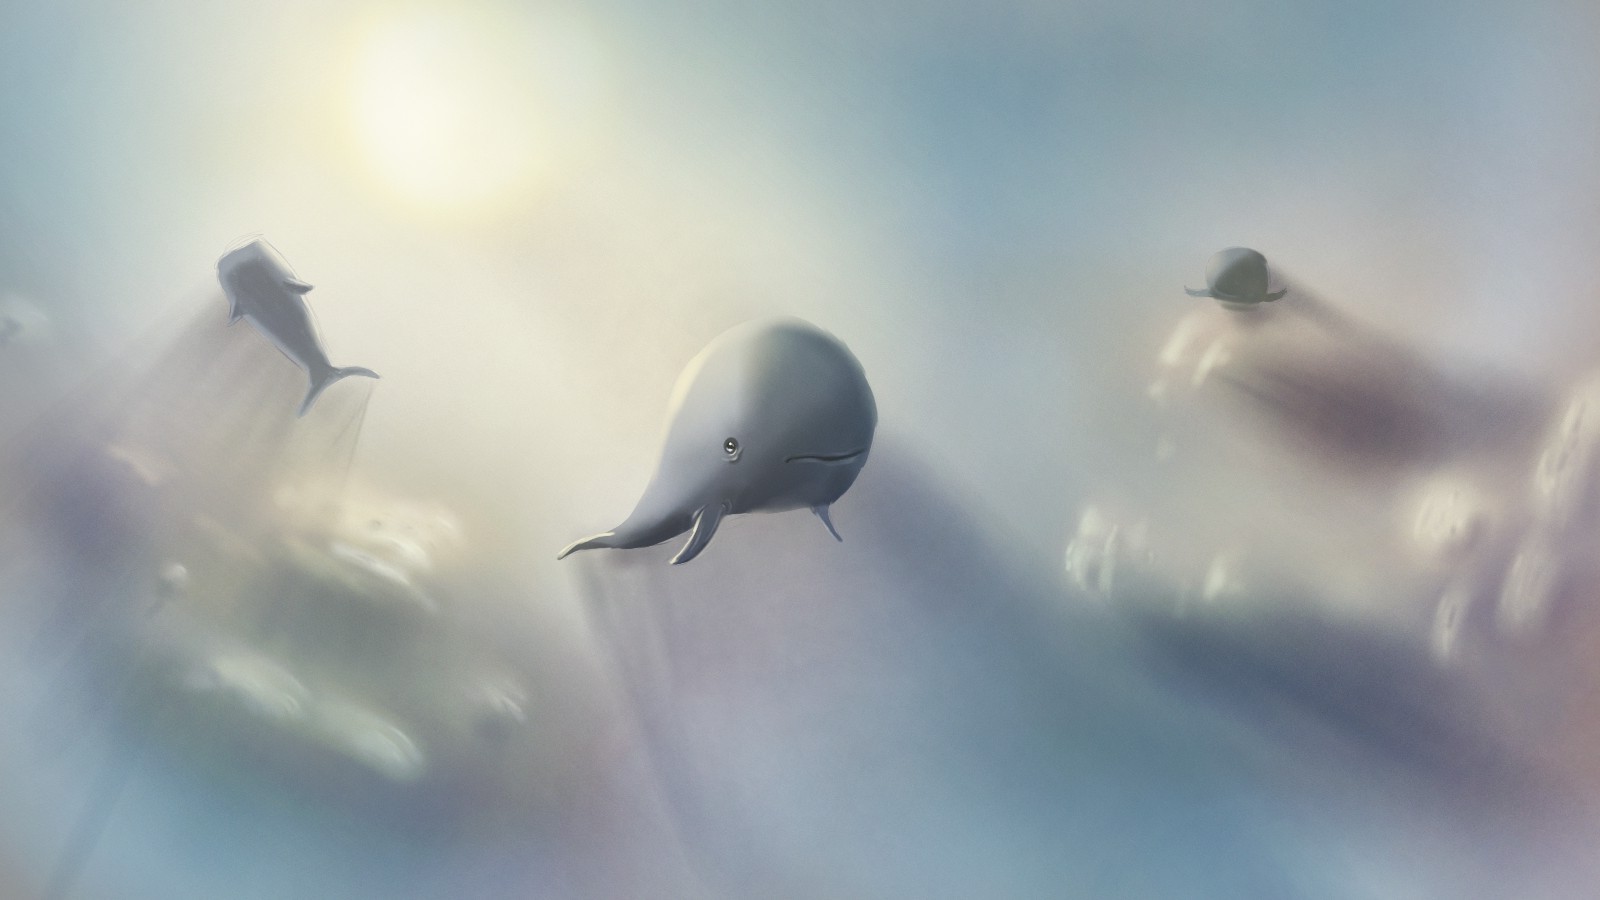 digital Art, Illustration, Nature, Flying, Whale, Moby Dick, Clouds, Sky, Fairy Tale, Sunlight, Sun Wallpaper